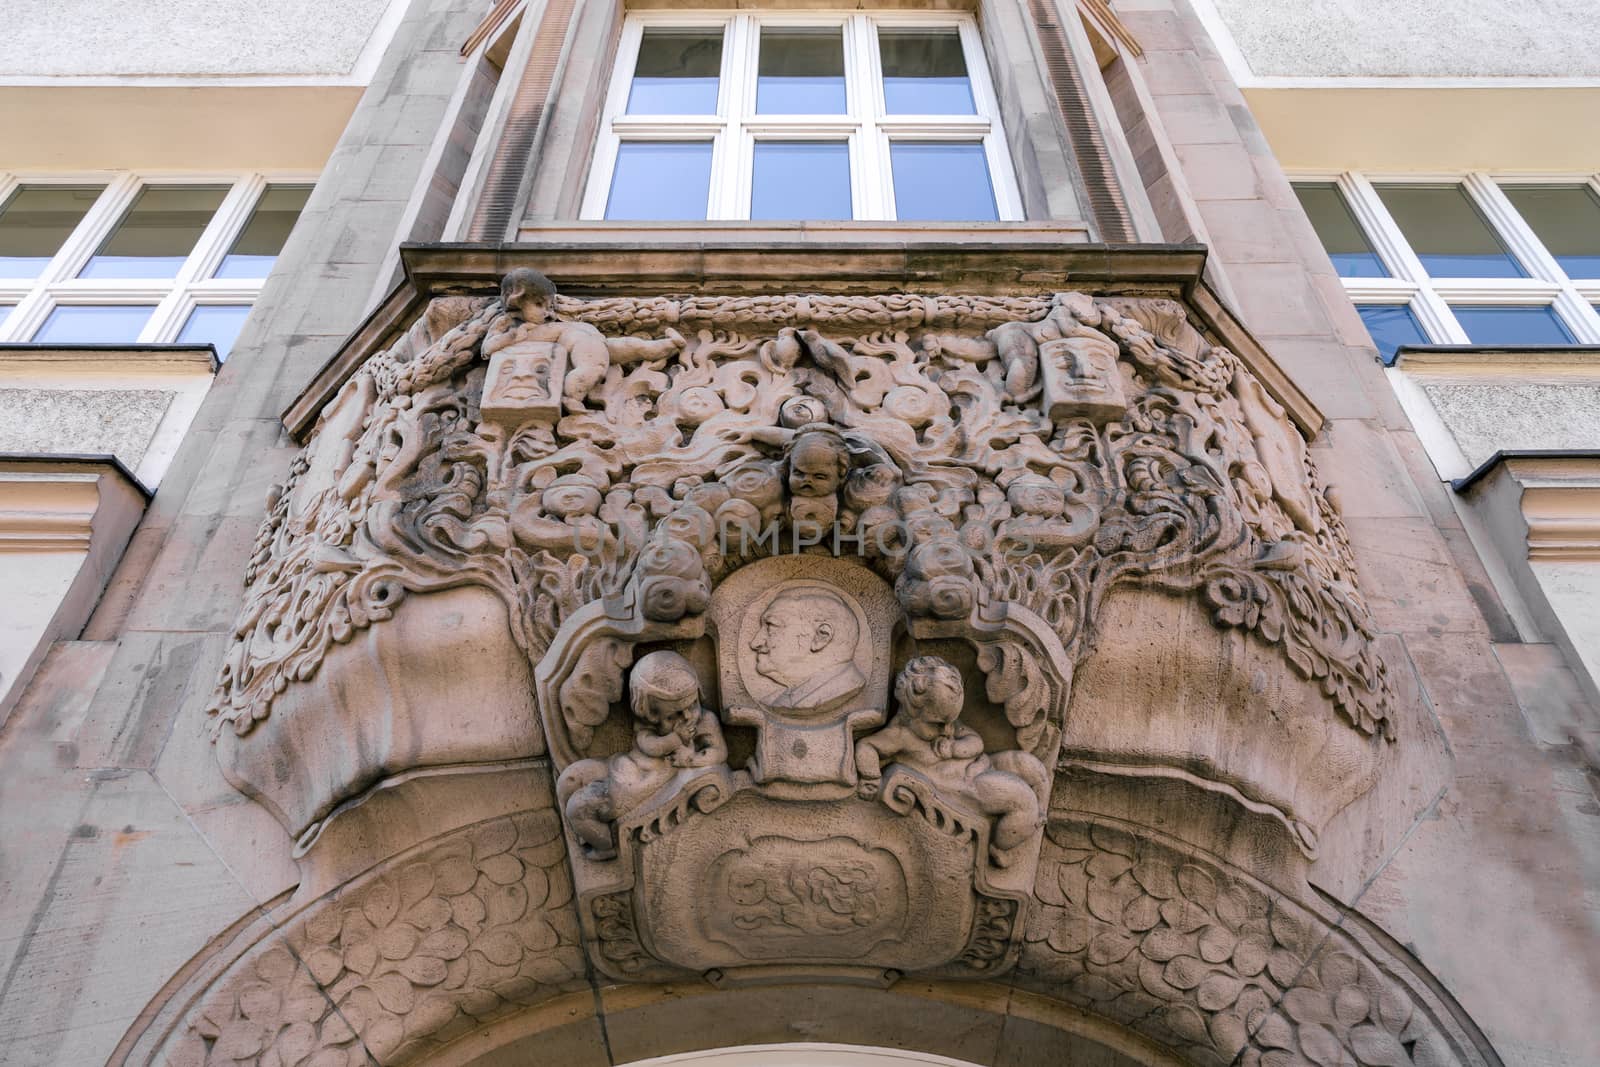 Detailed sculptural decoration of the gable and arched entrance in the Baroque style. Figures carved in stones adorn the entrance of a building with historical details in the city of Berlin.